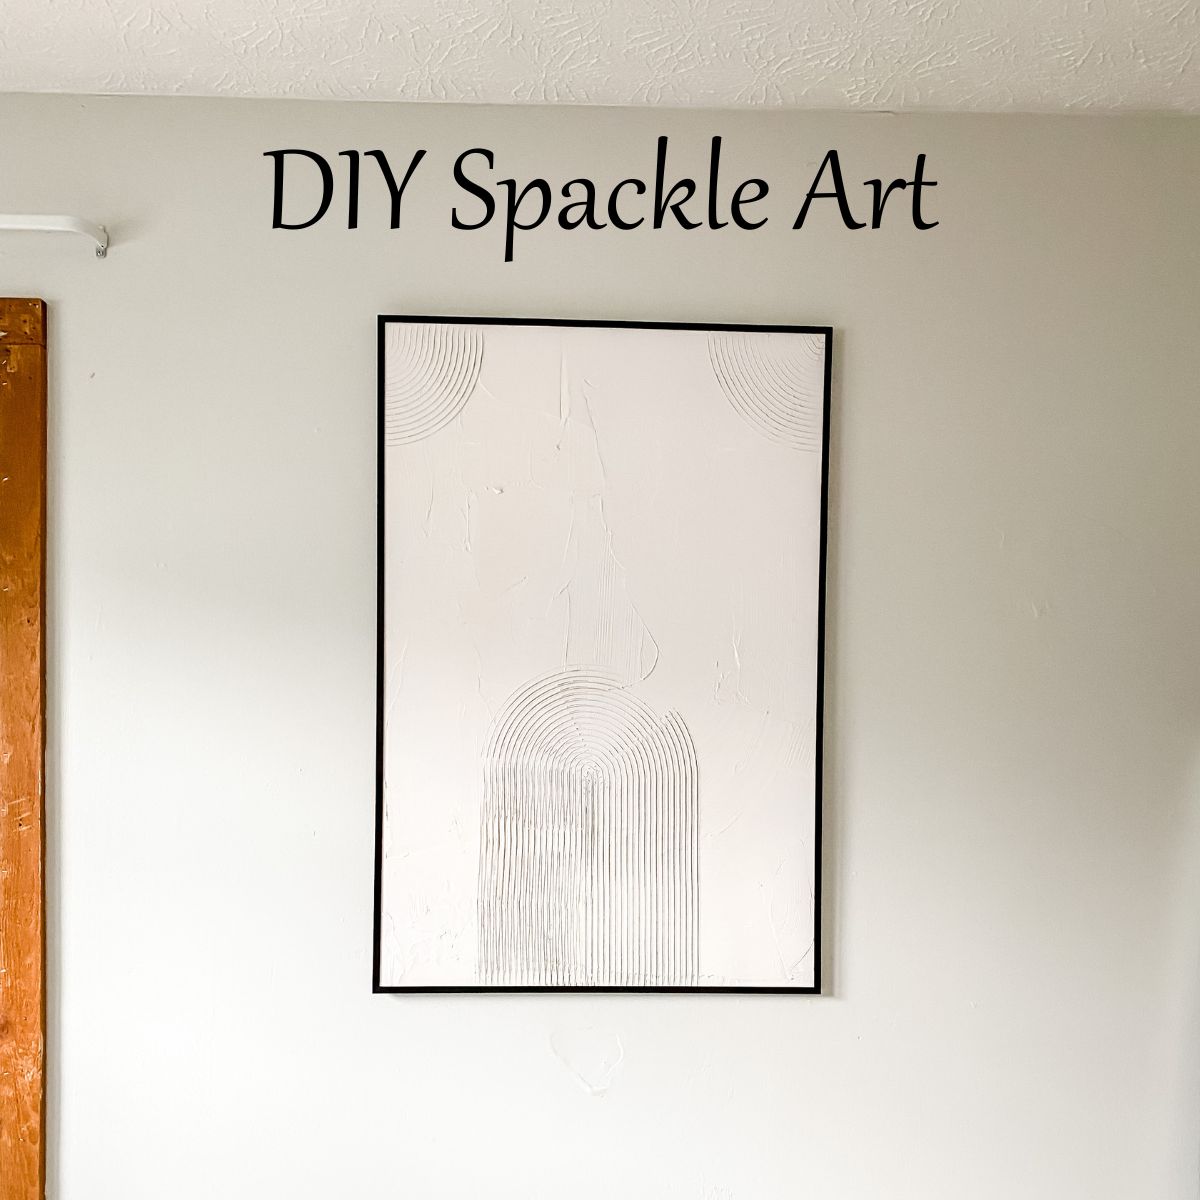 DIY spackle art hanging in the wall with text overlay.